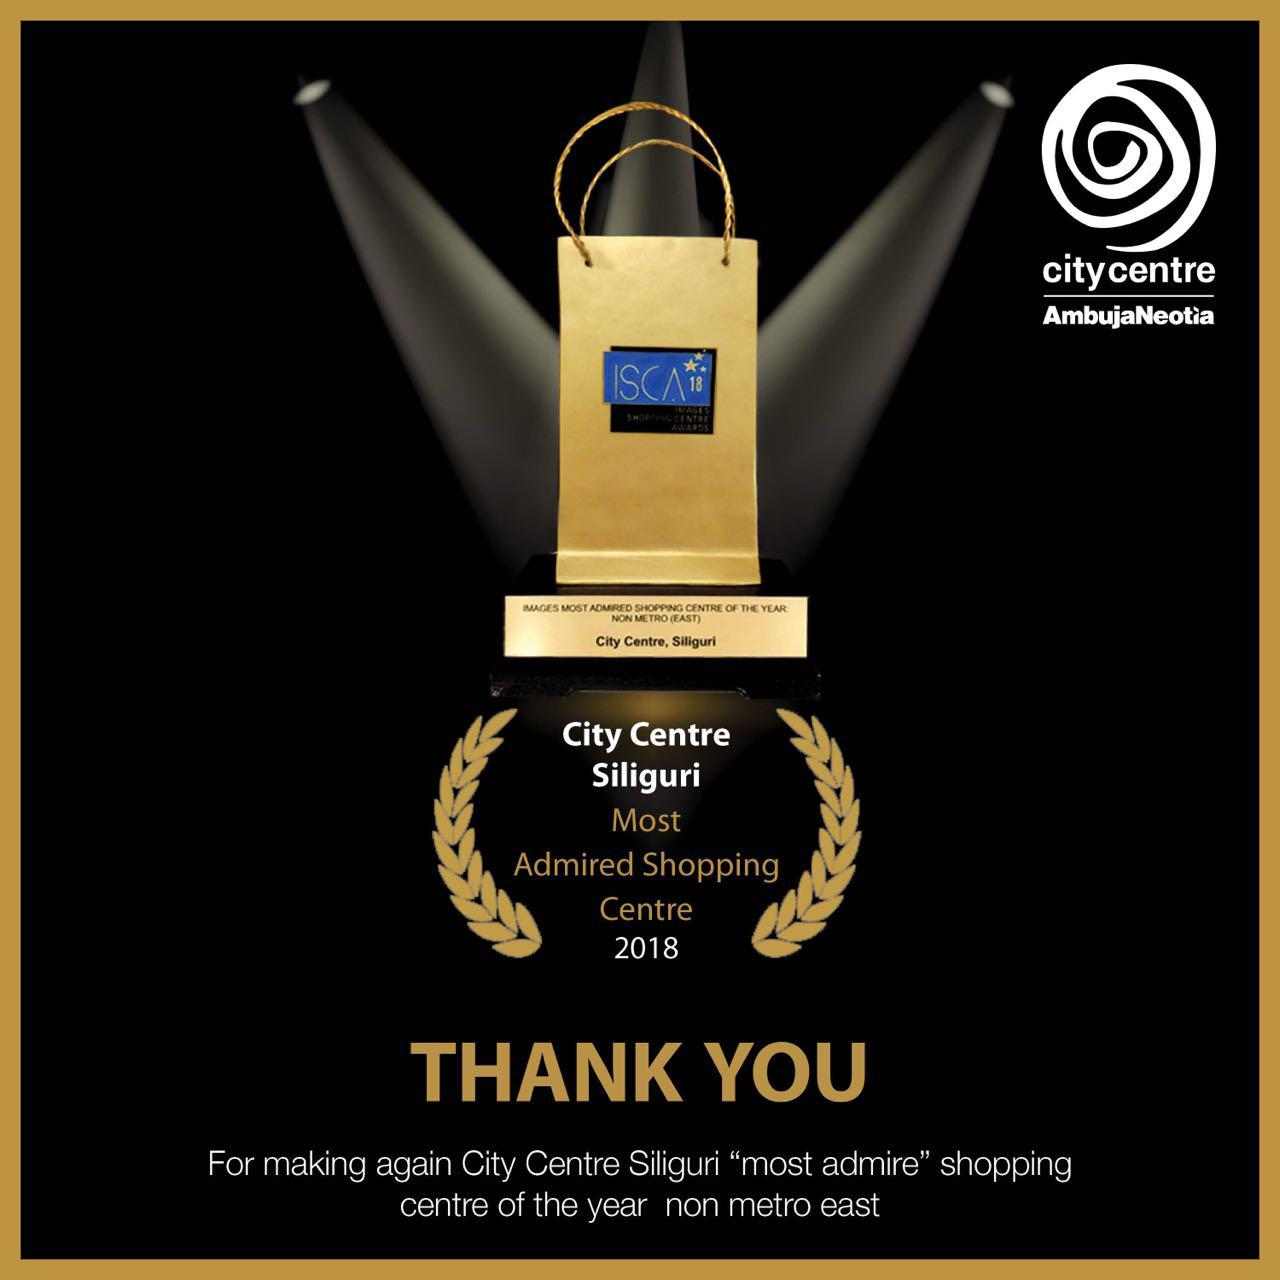 City Centre Siliguri awarded most admired Shopping Centre 2018 Update